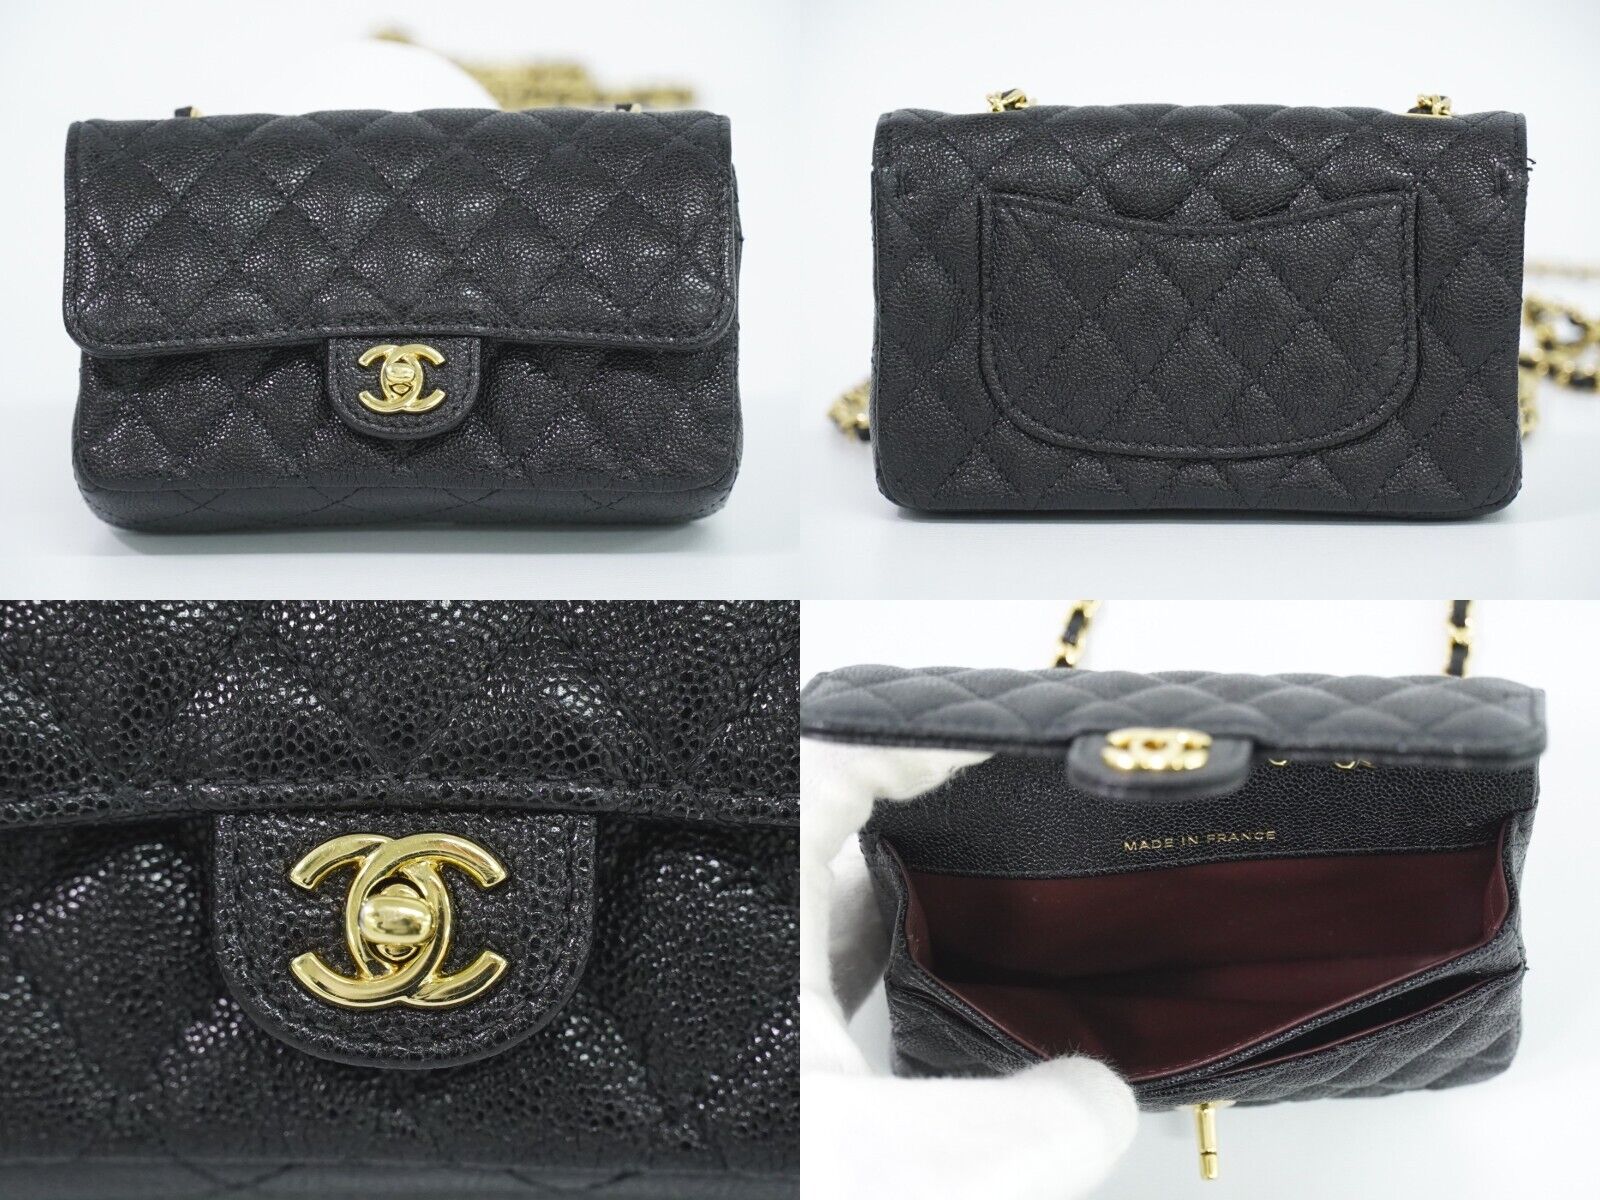 CHANEL Success Story Set of 4 Mini Bags with Trunk Black